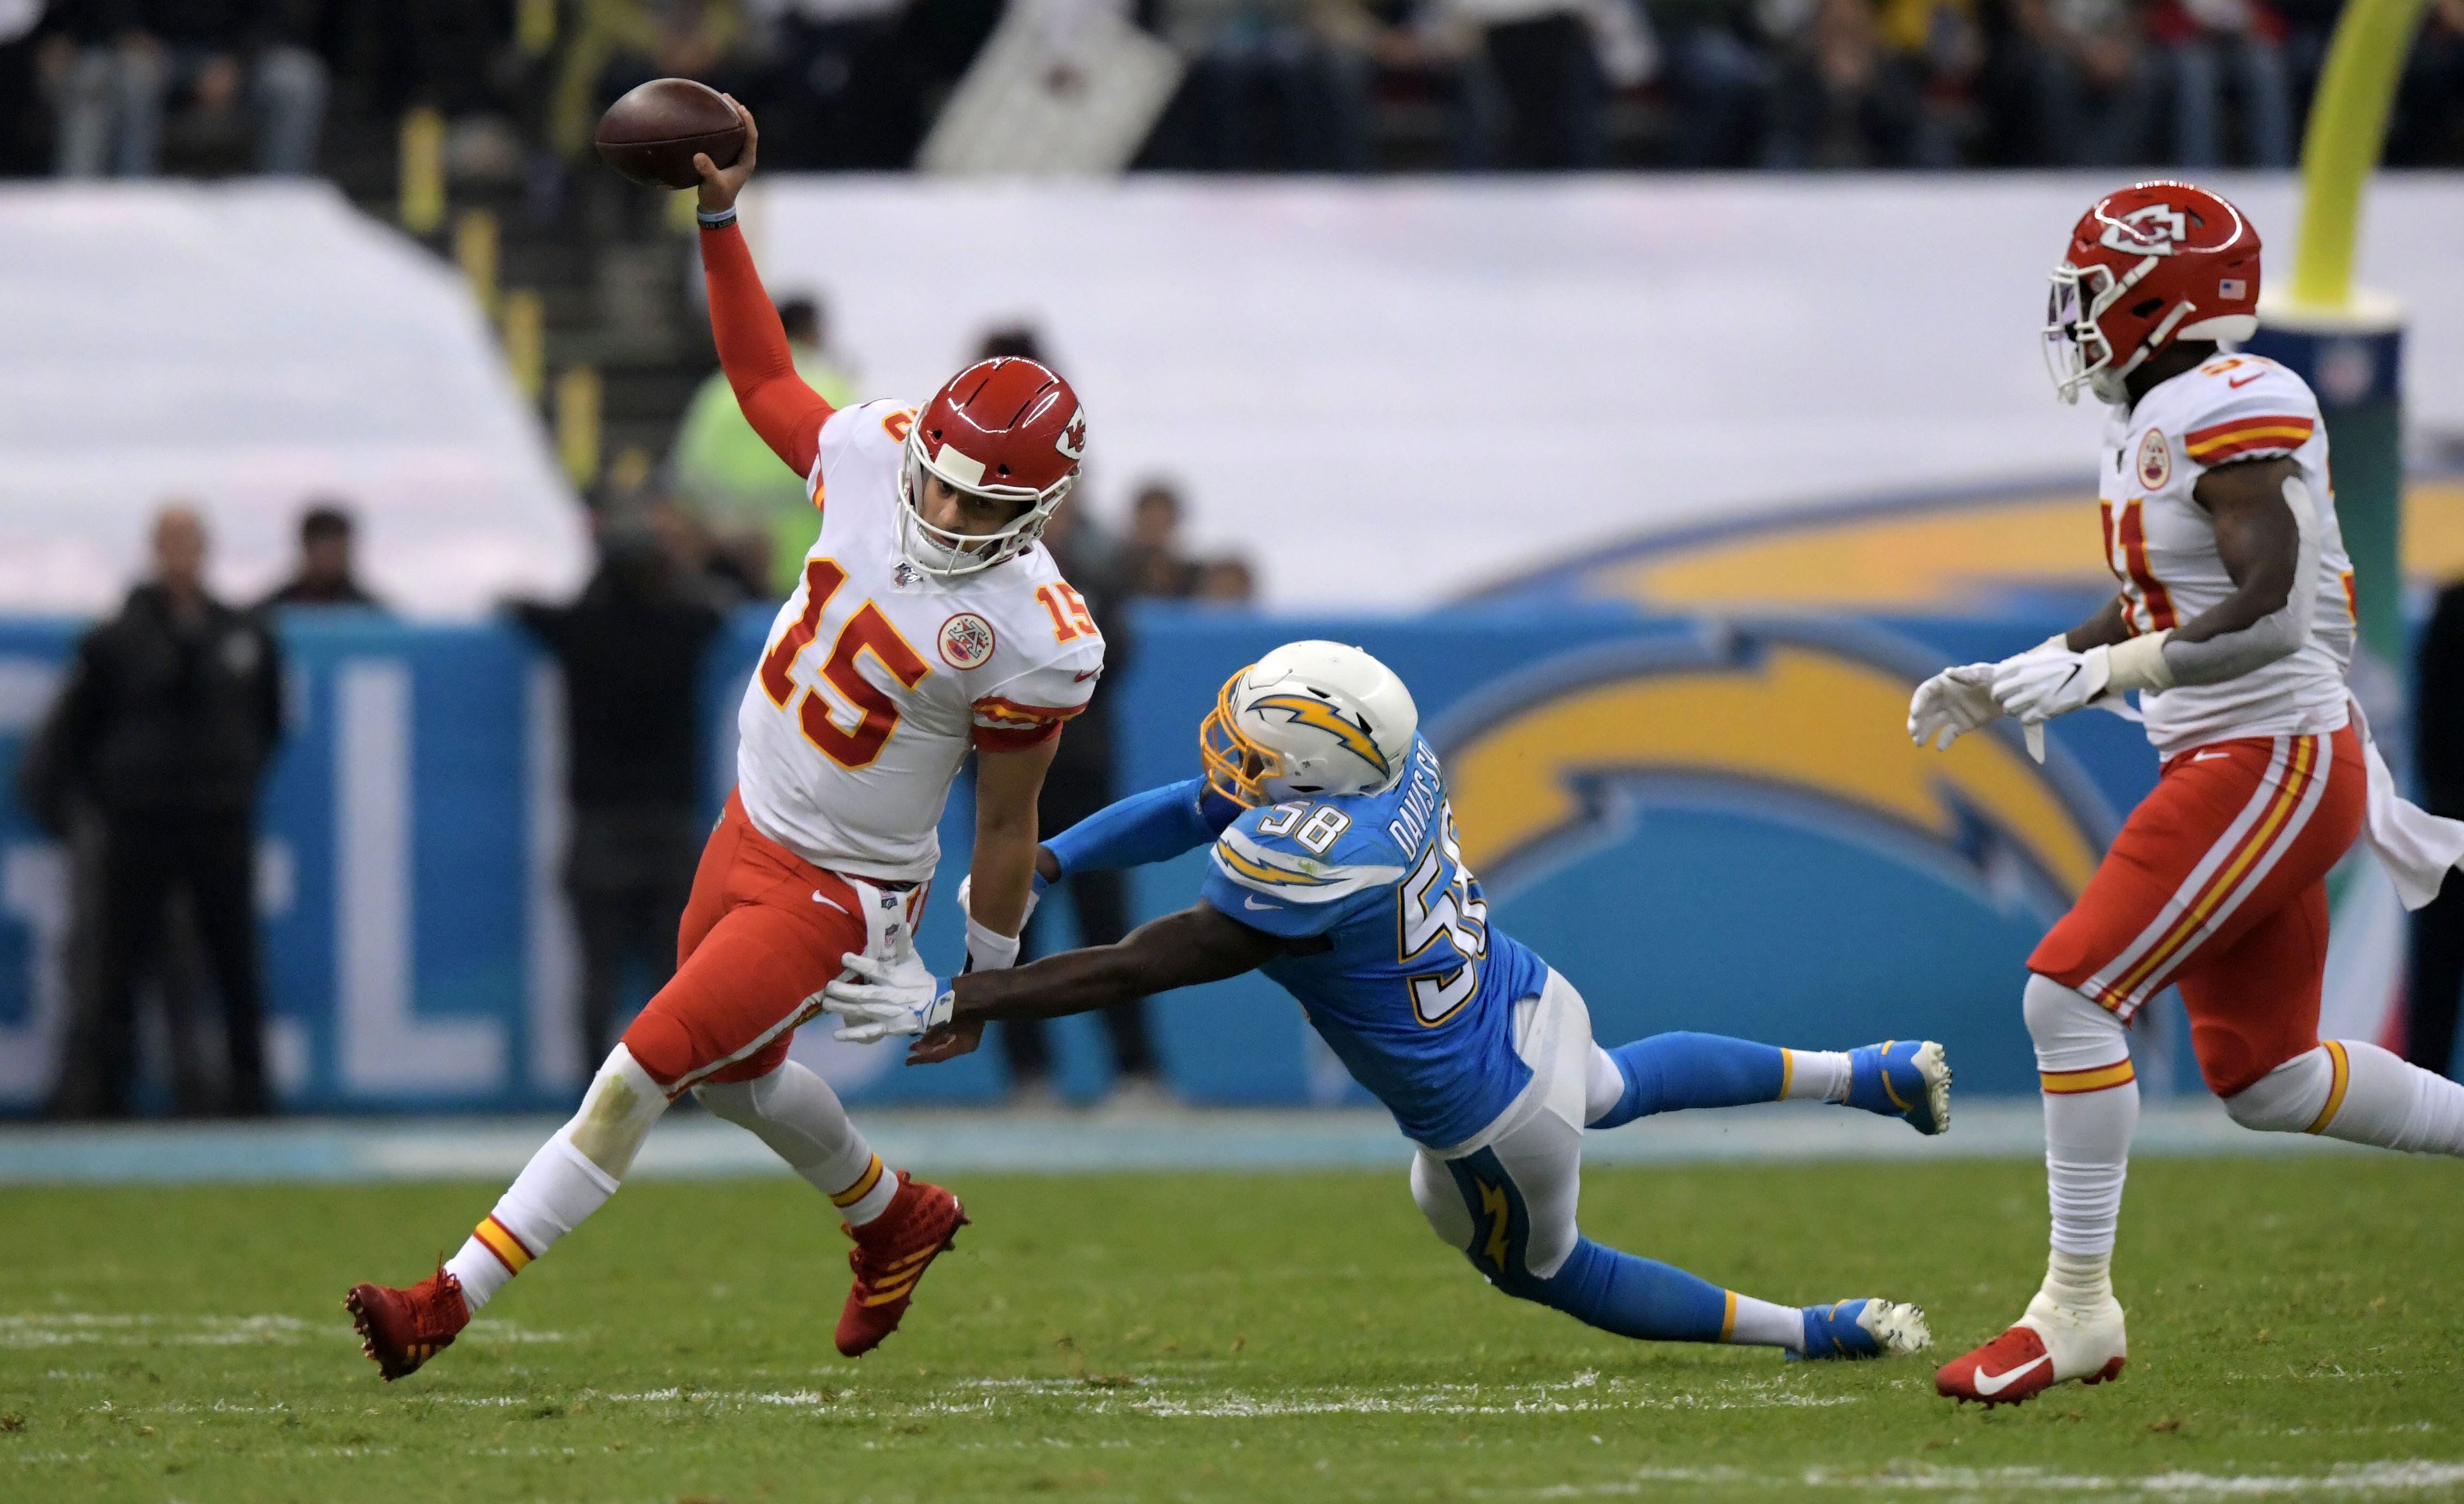 Nov 18, 2019; Mexico City, MEX; dKansas City Chiefs quarterback Patrick Mahomes (15) is pursued by Los Angeles Chargers outside linebacker Thomas Davis (58) in the third quarter during an NFL International Series game at Estadio Azteca. The Chiefs defeated the Chargers 24-17. Mandatory Credit: Kirby Lee-USA TODAY Sports